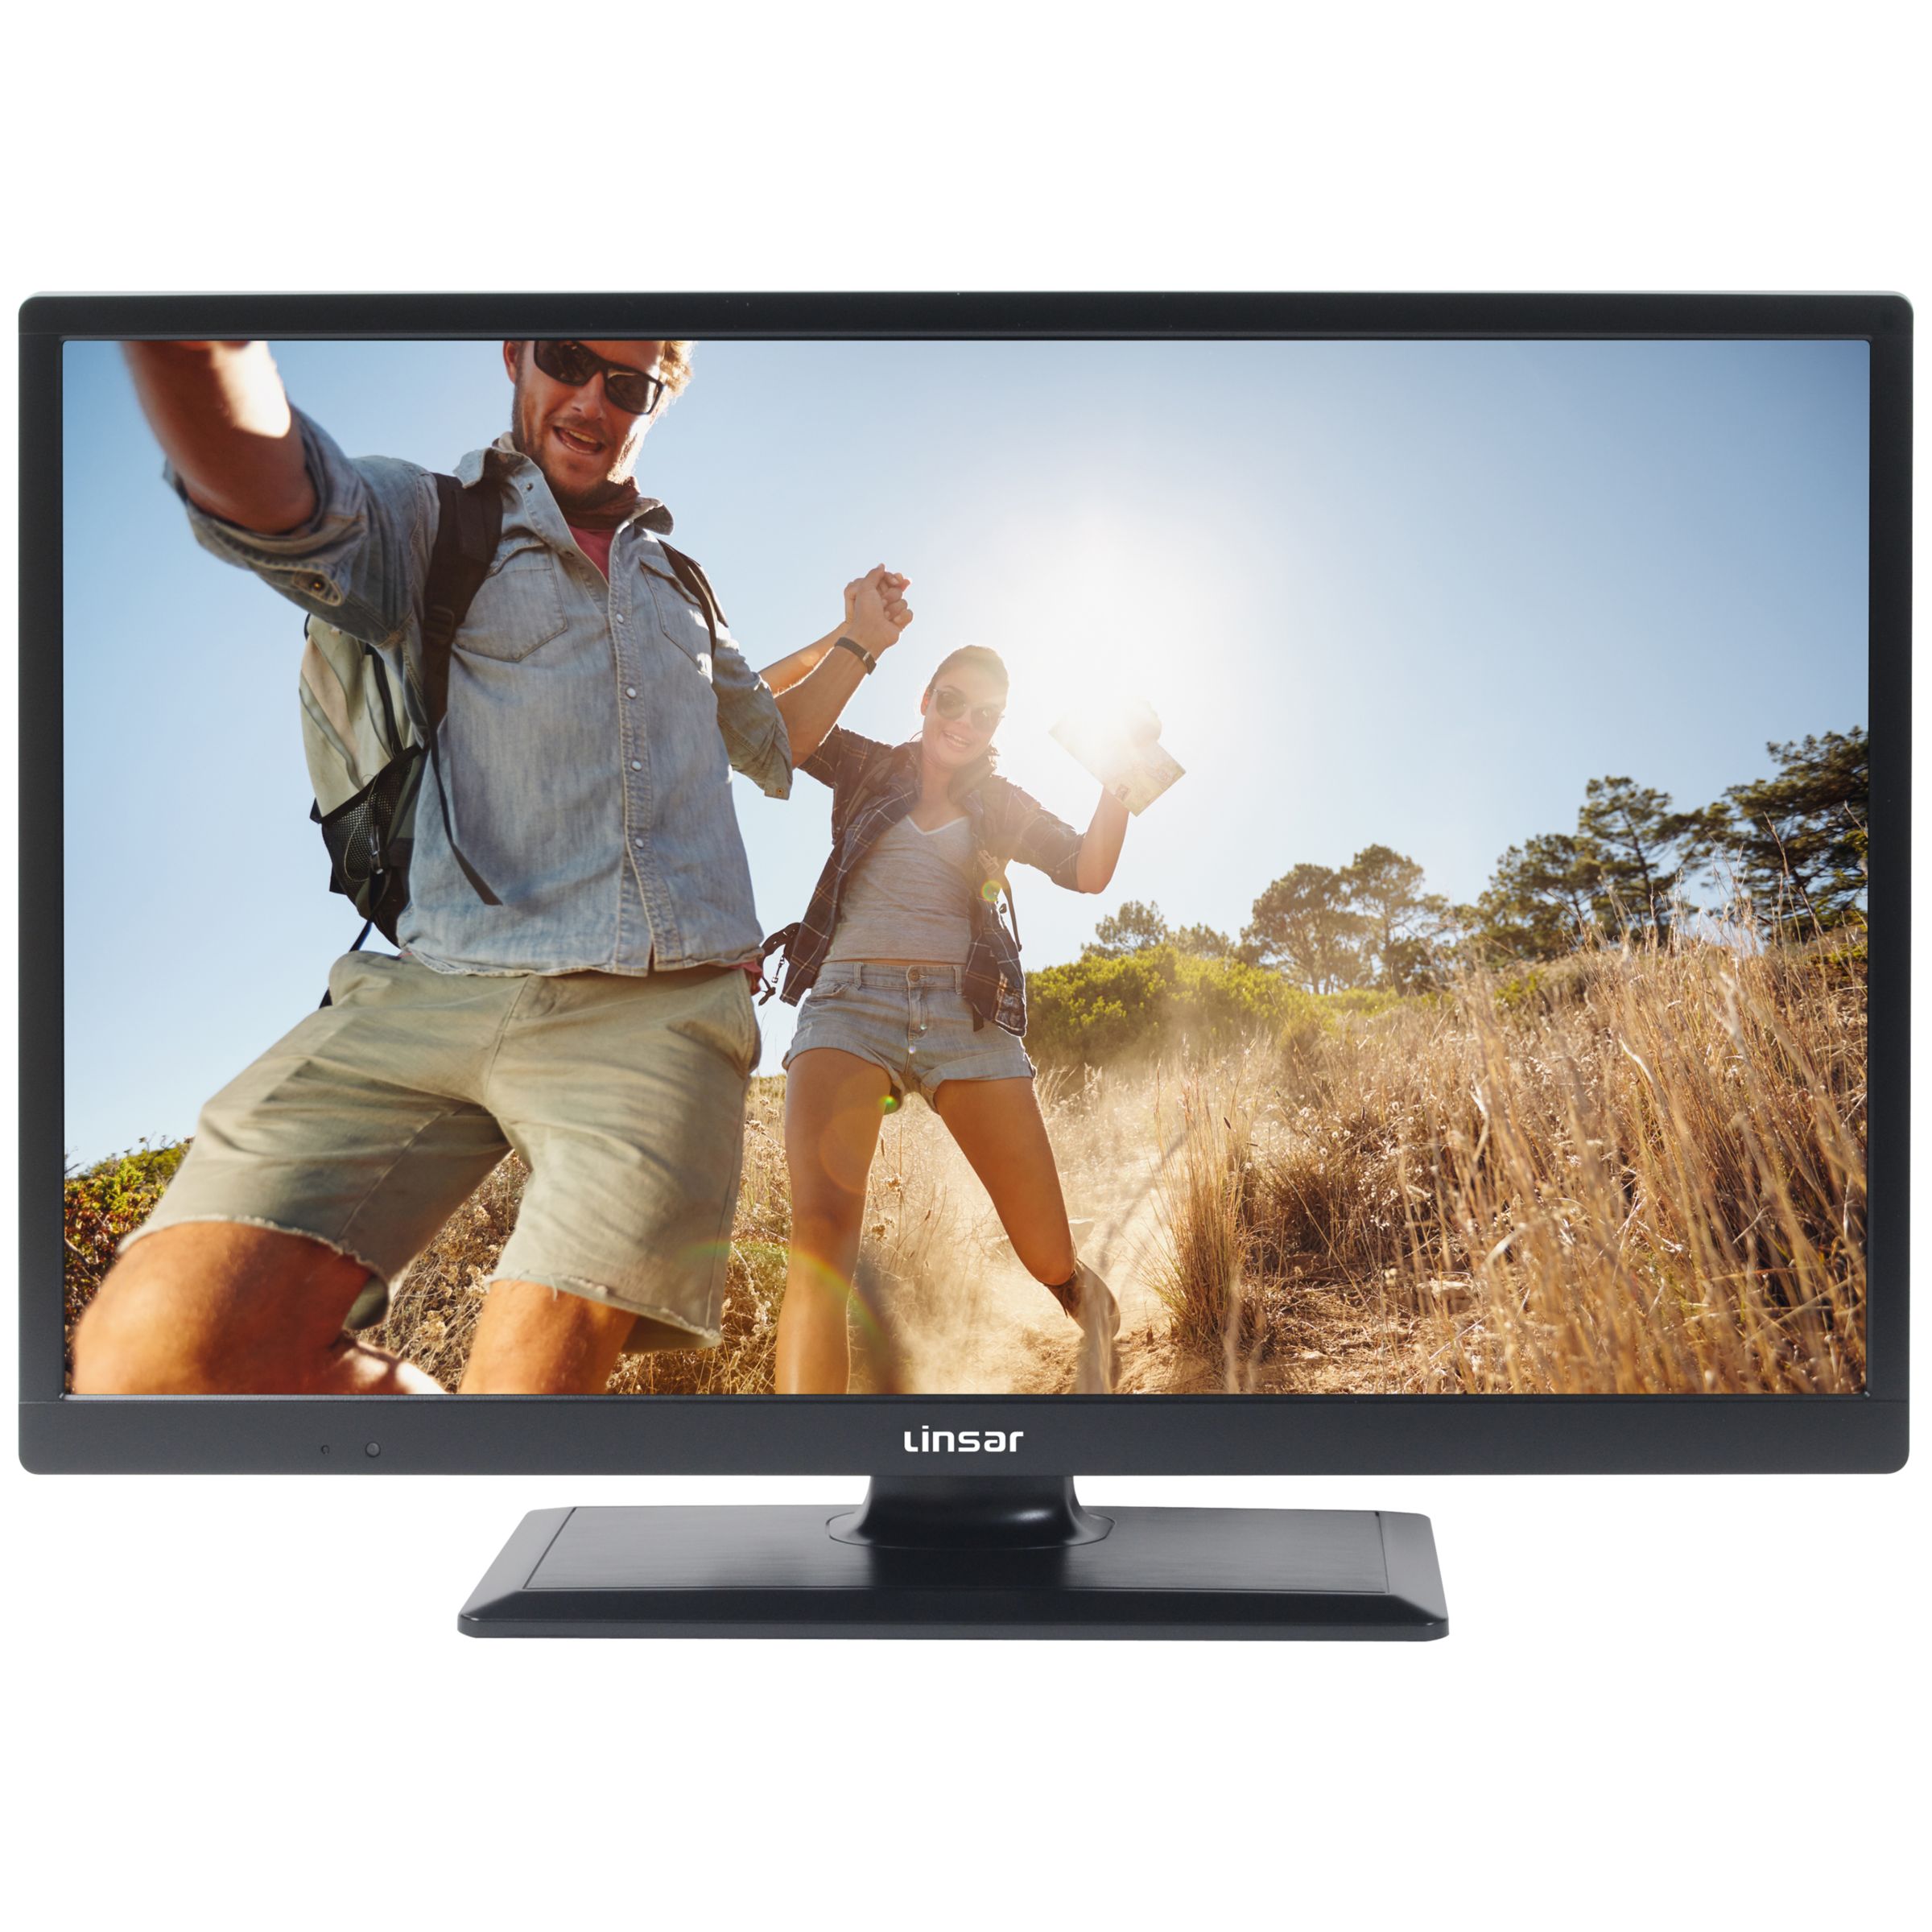 Linsar 24LED1700 LED HD Ready 720p Smart TV, 24 with Built-In Wi-Fi, Freeview HD & Freeview Play